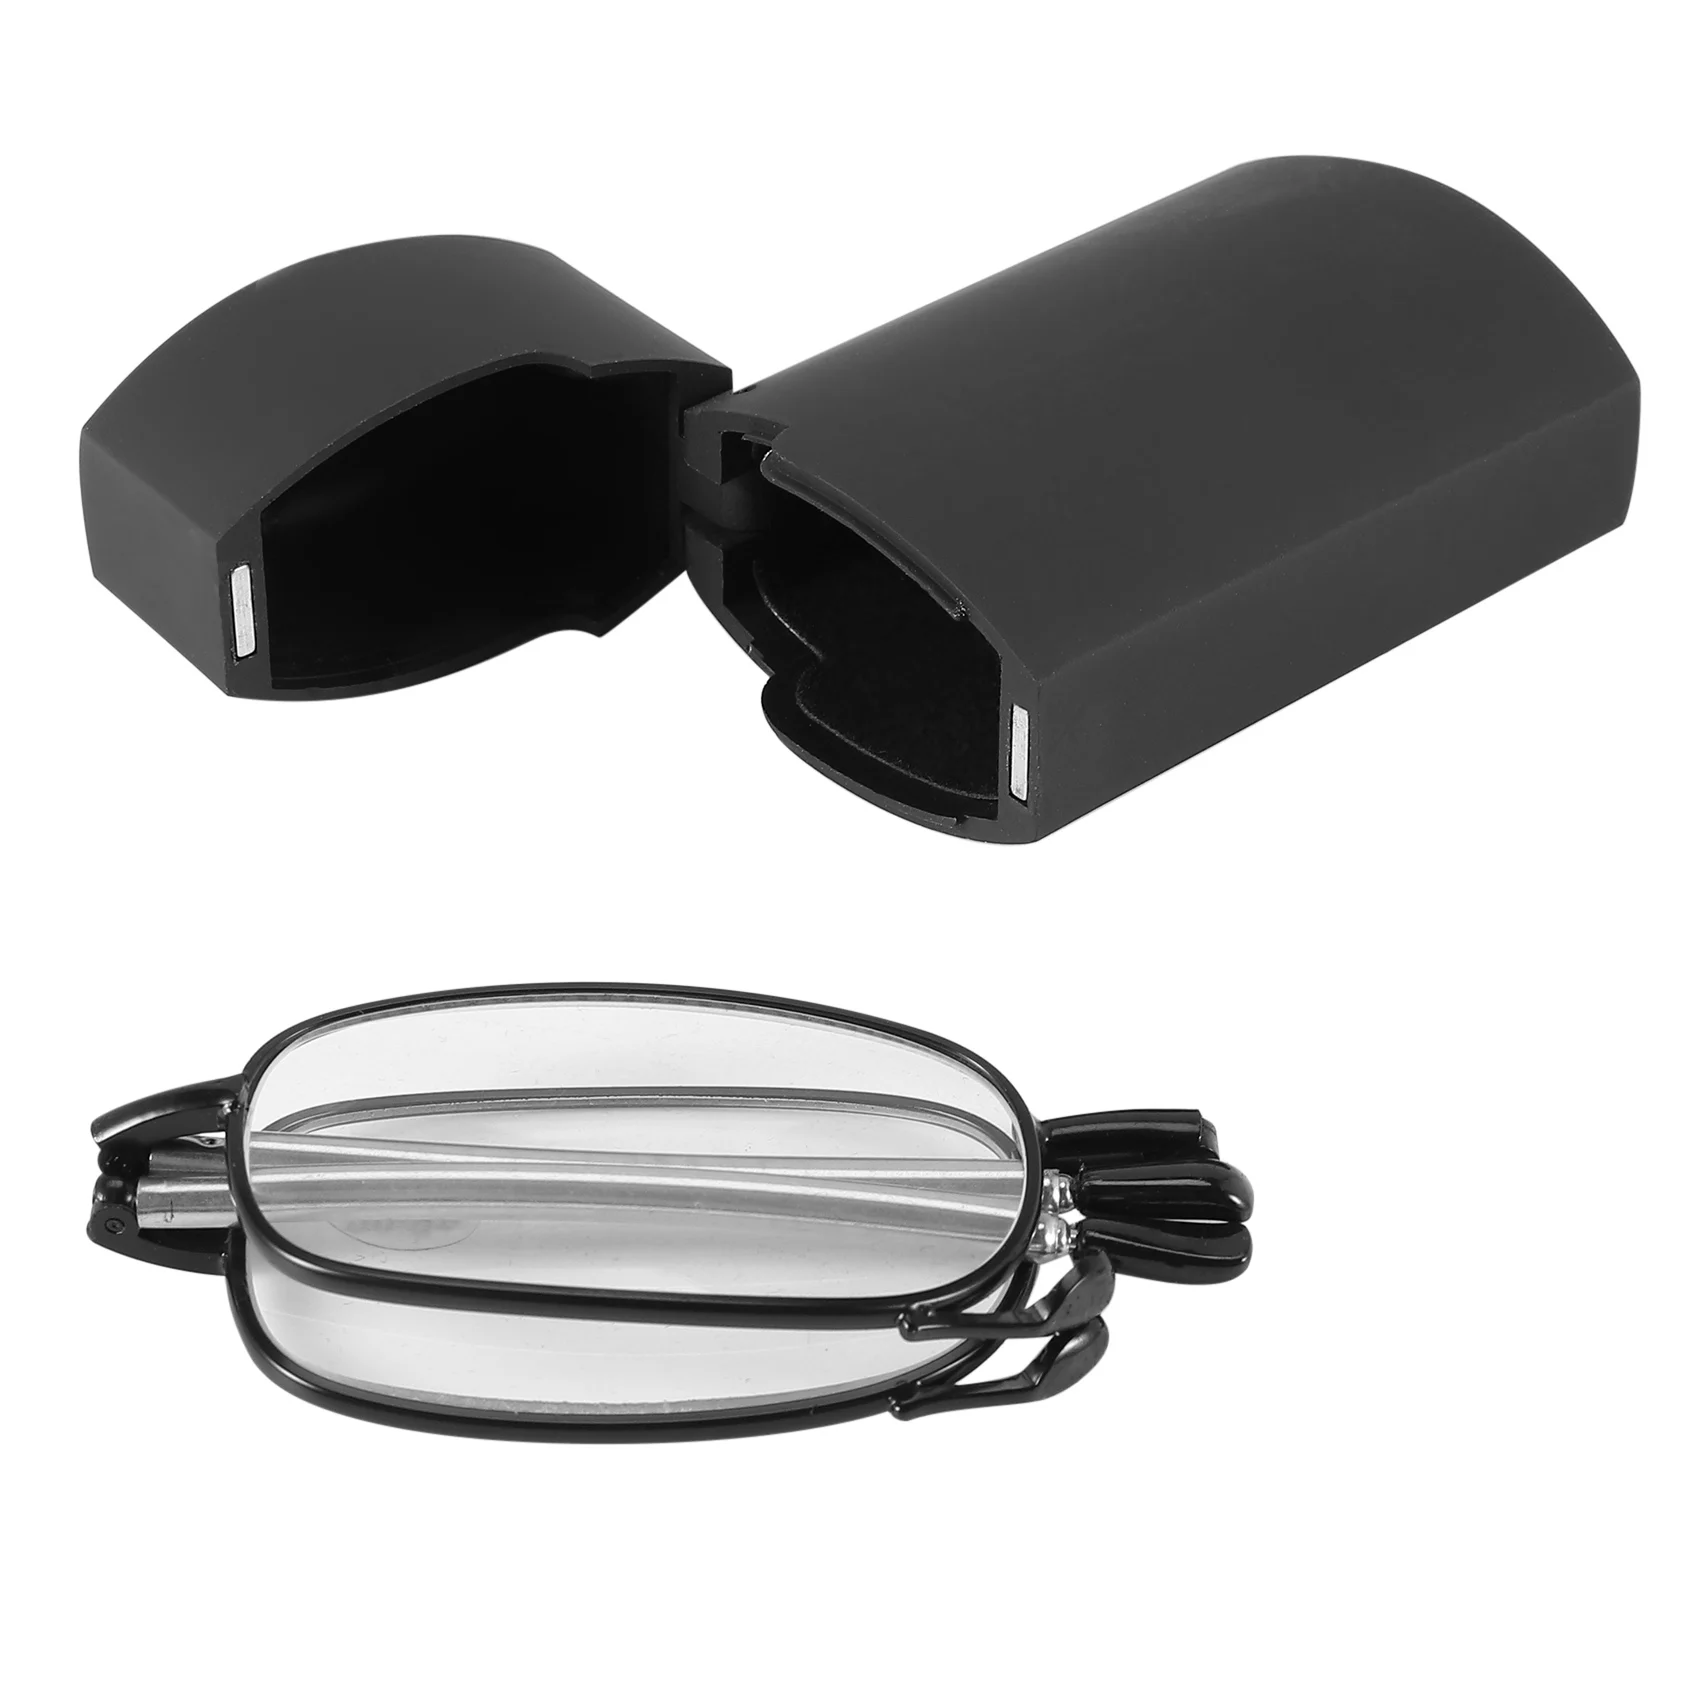 

Portable 1 Pairs of Compact Folding Reading Glasses with Mini Flip Top Carrying Case for Fashion Men and Women Rotation